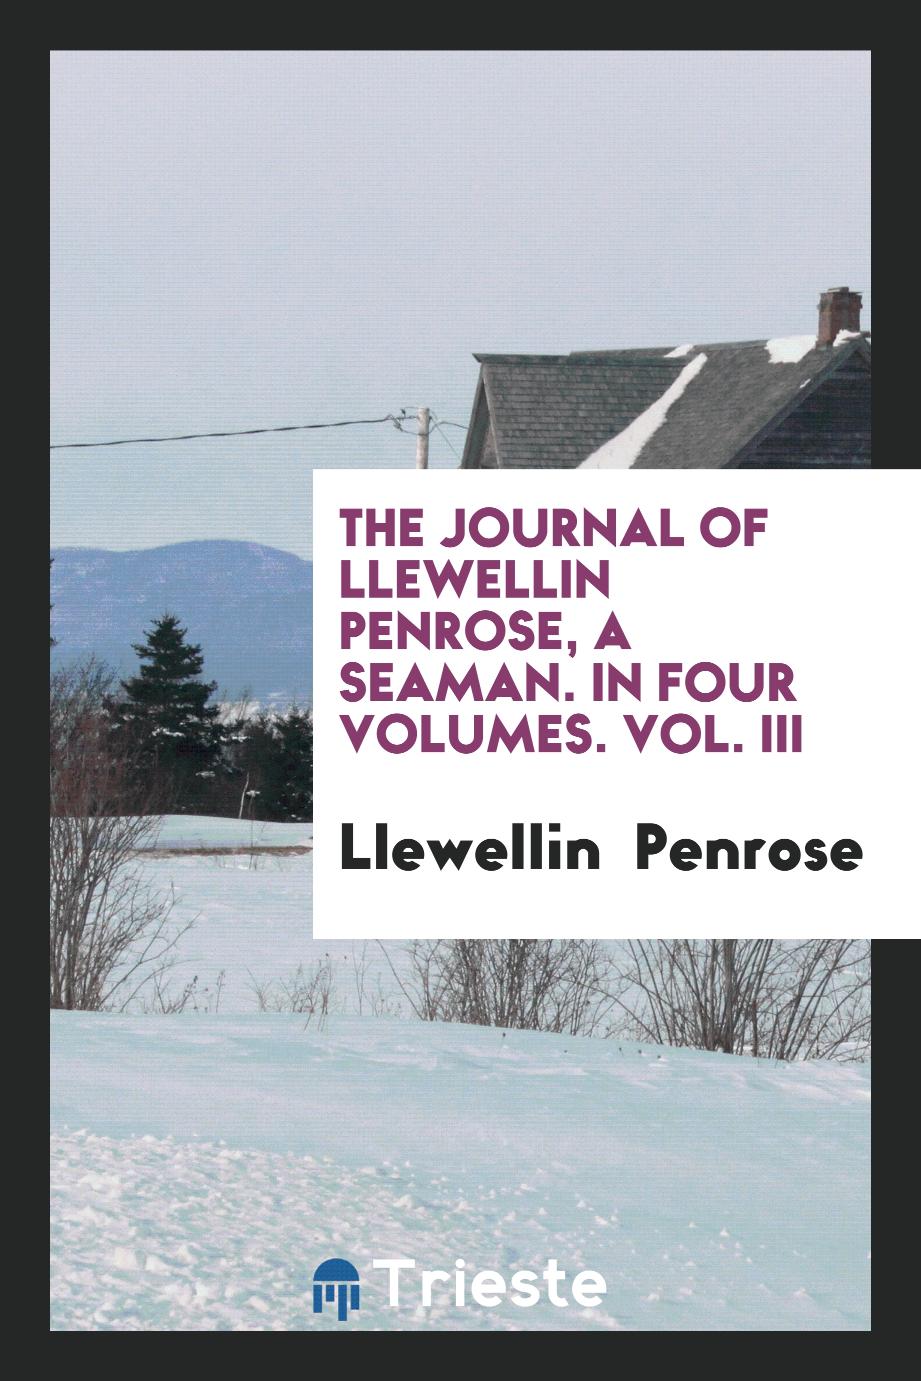 The Journal of Llewellin Penrose, a Seaman. In Four Volumes. Vol. III